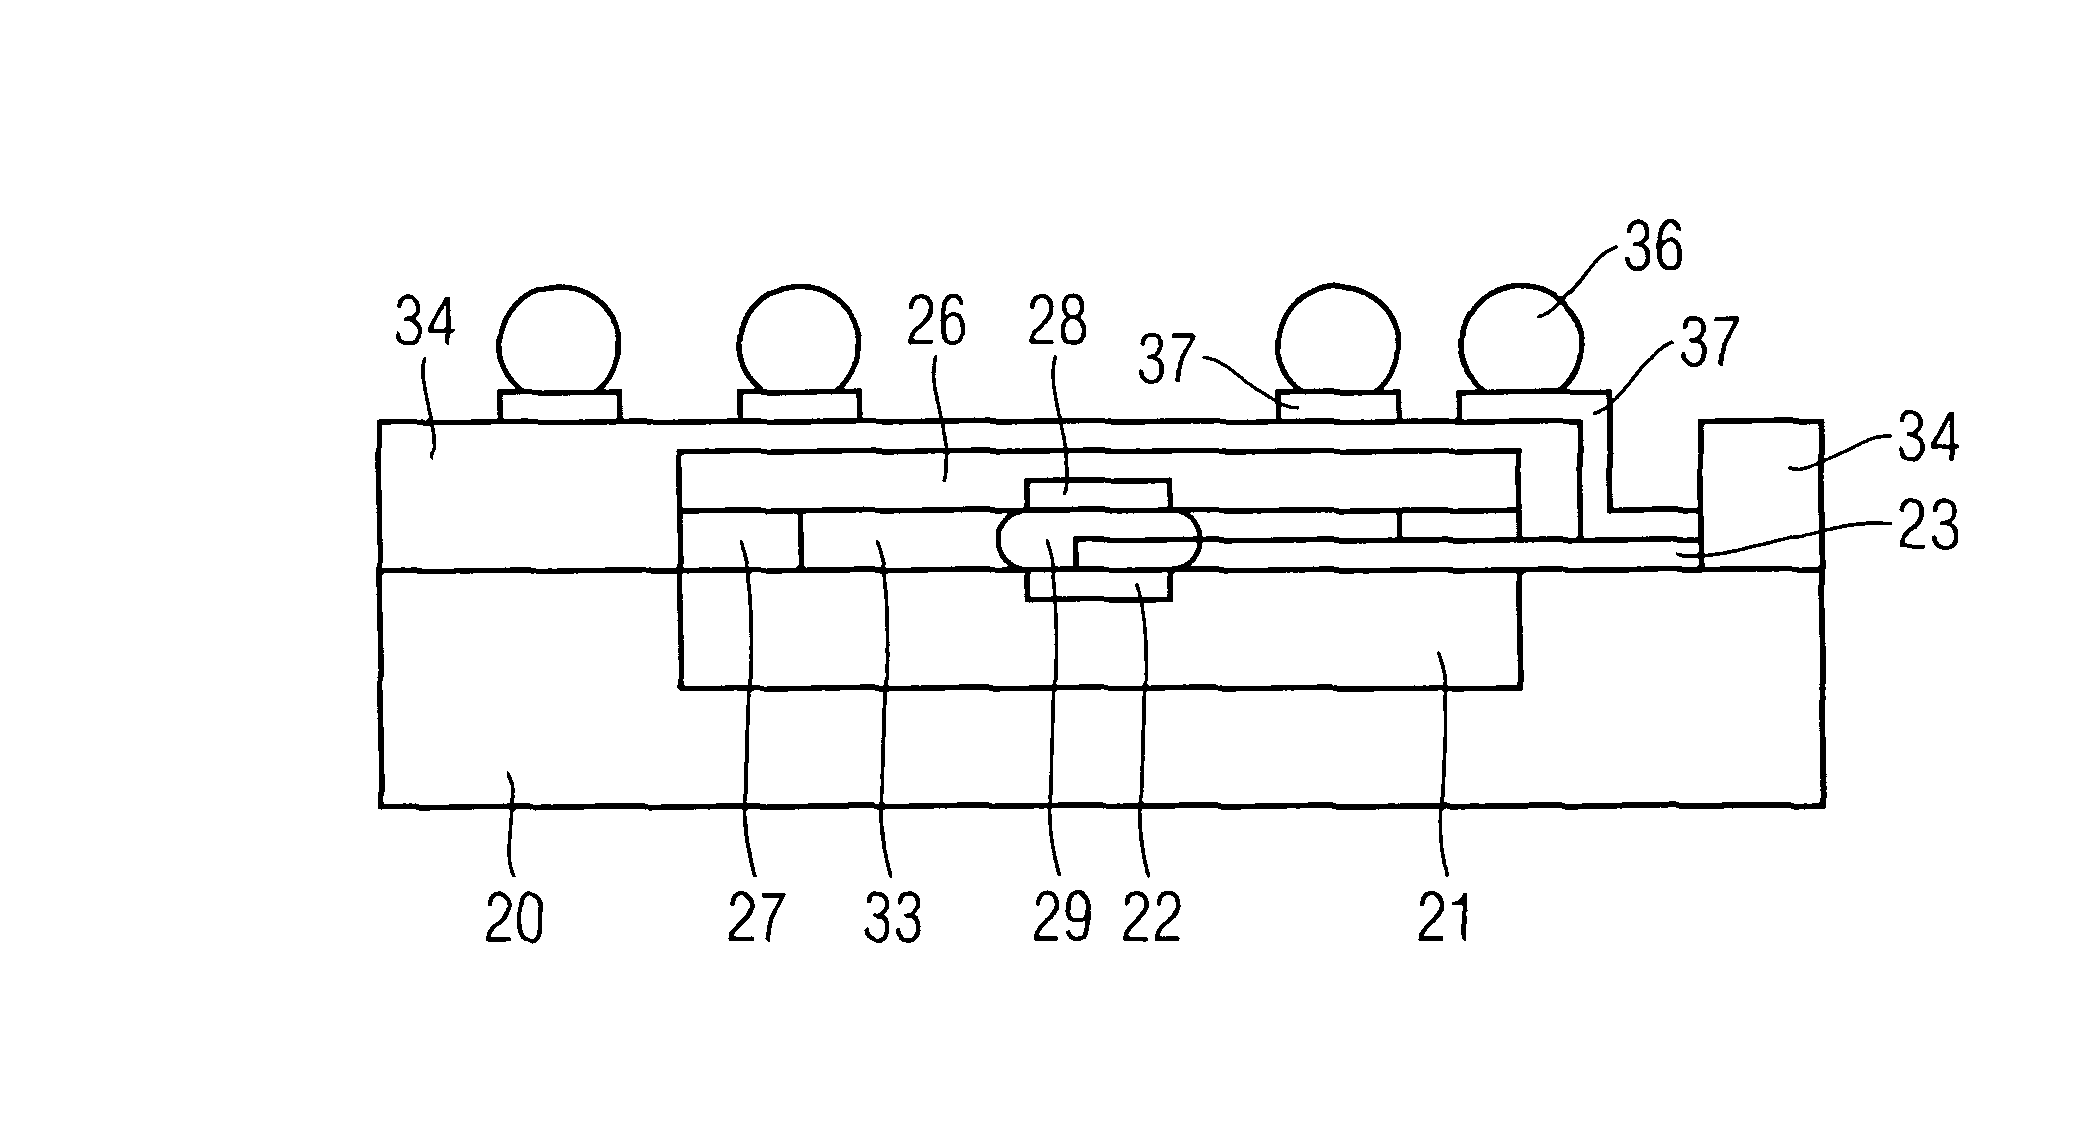 Semiconductor apparatus having stacked semiconductor components